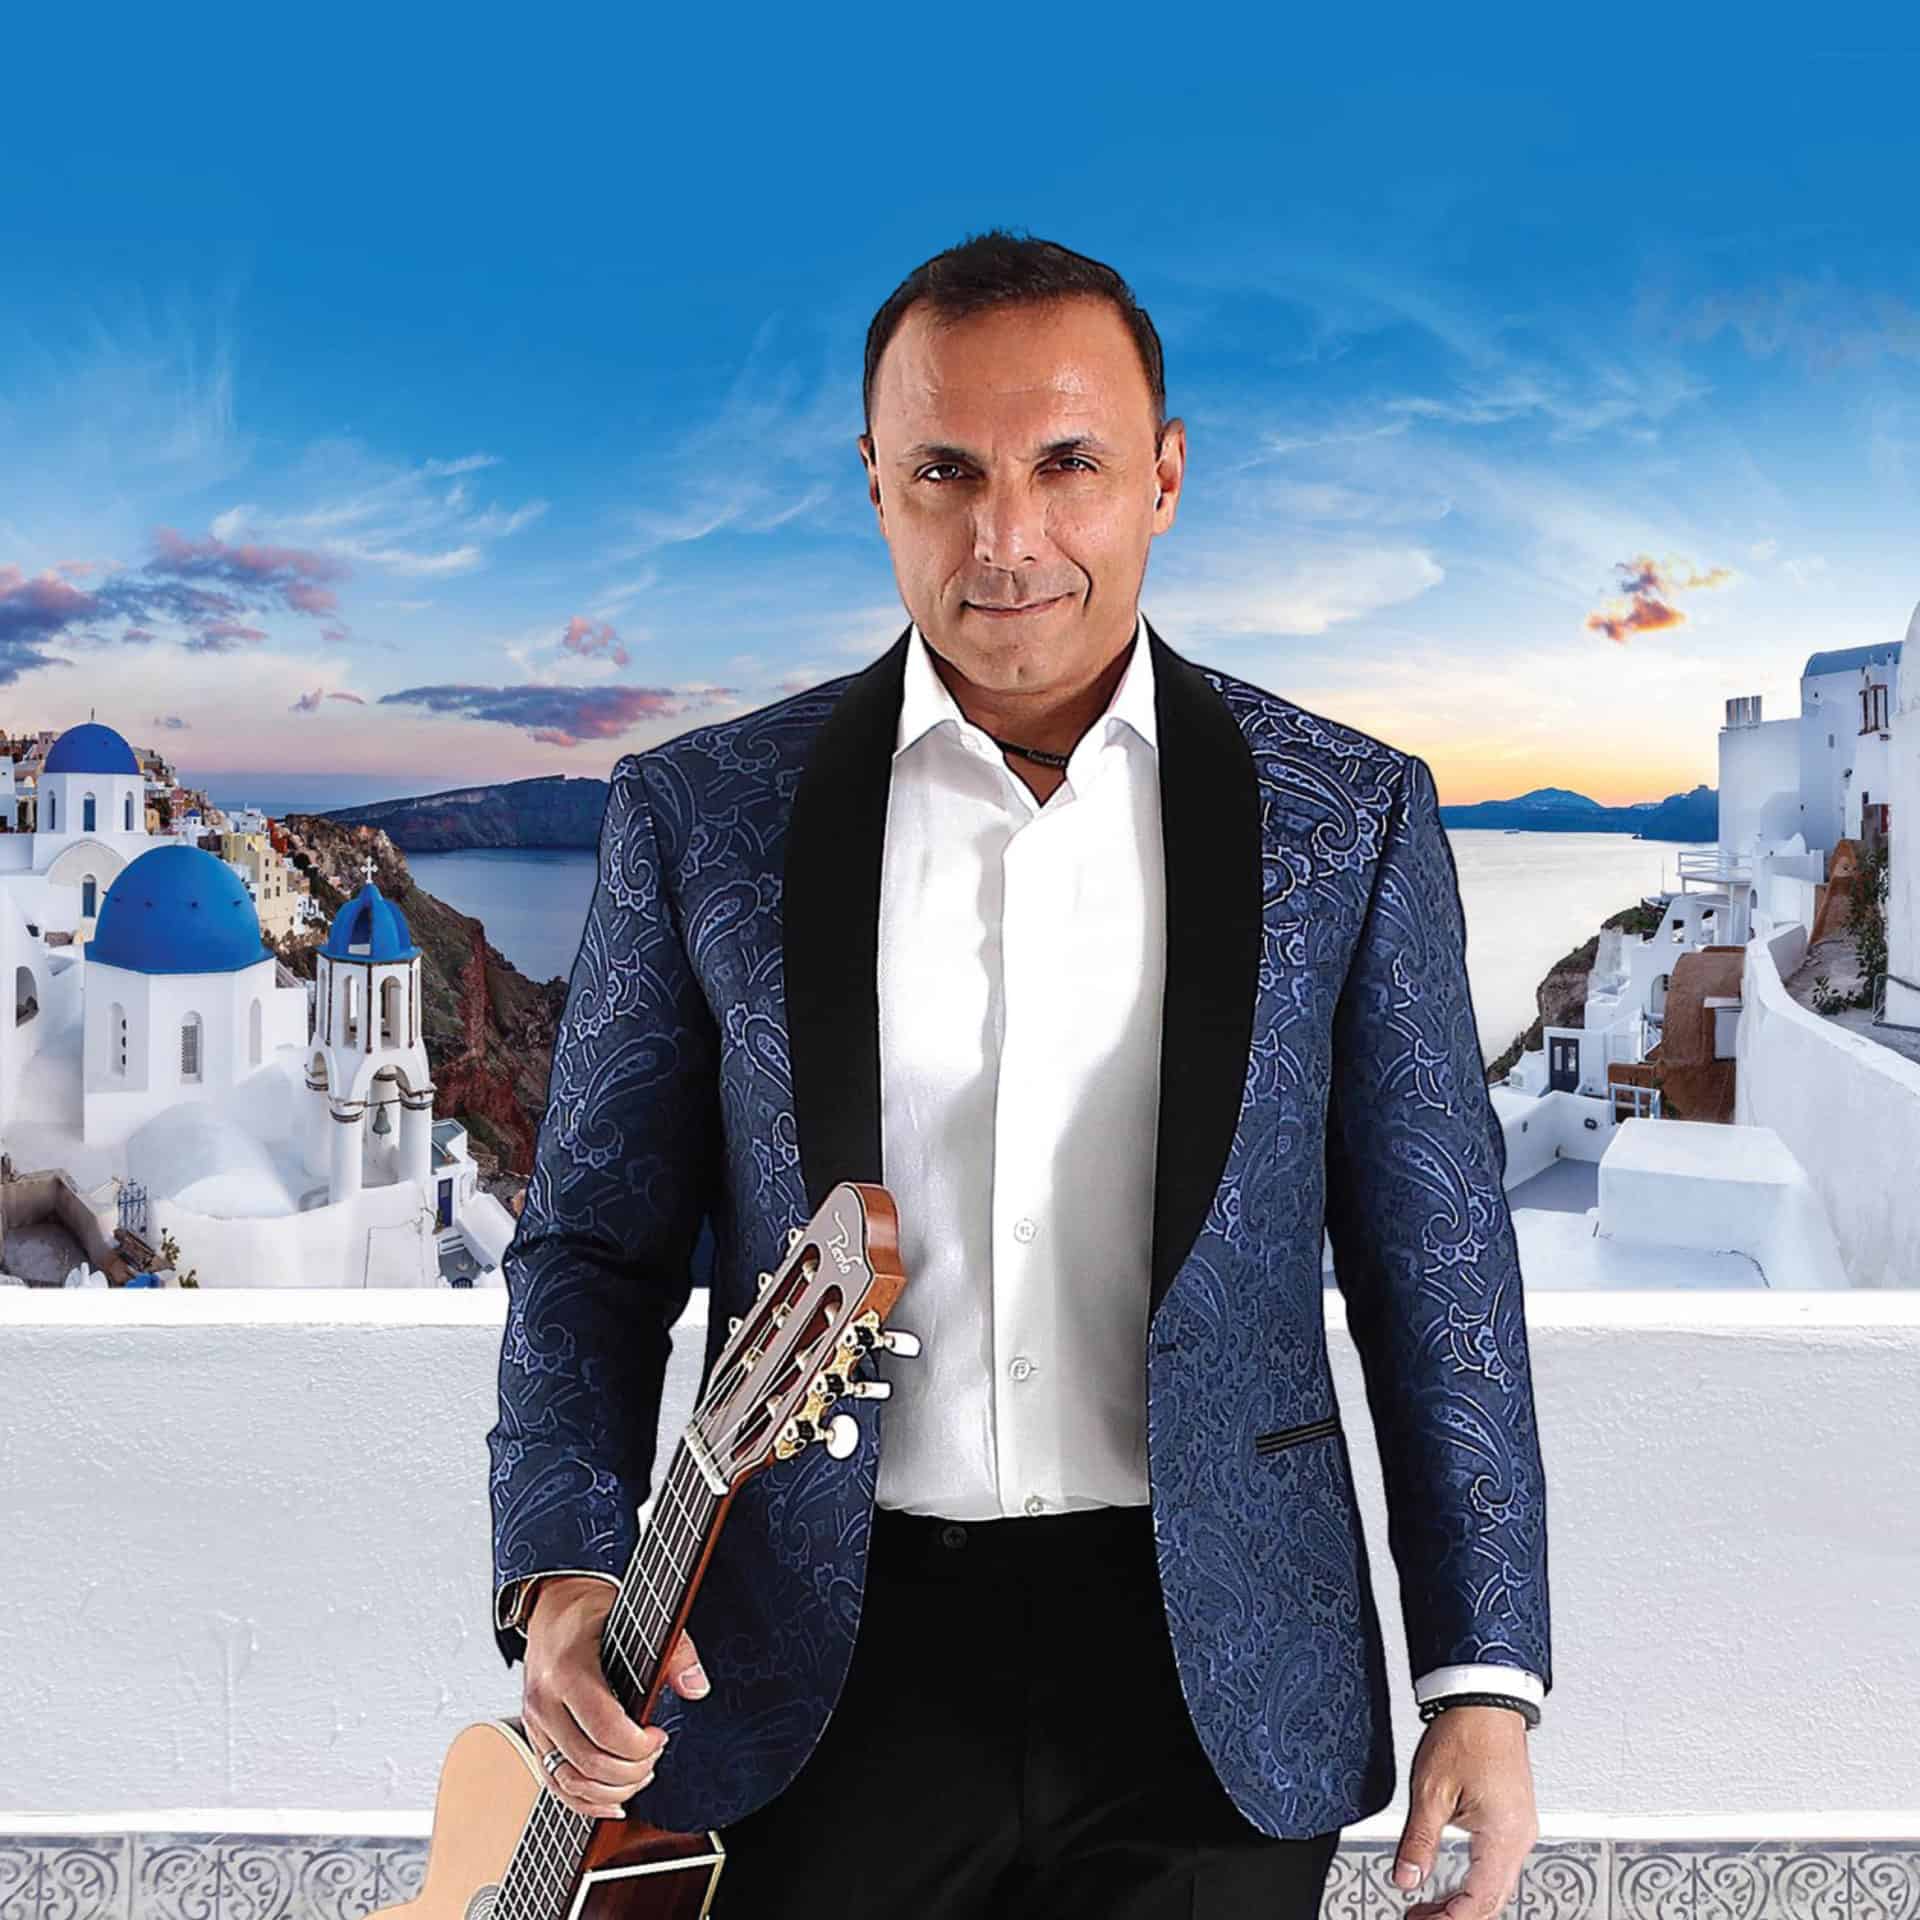 Pavlo standing in front of Greece, white houses and a blue sky behind him. He is holding a guitar in his hand and wearing a blue jacket.